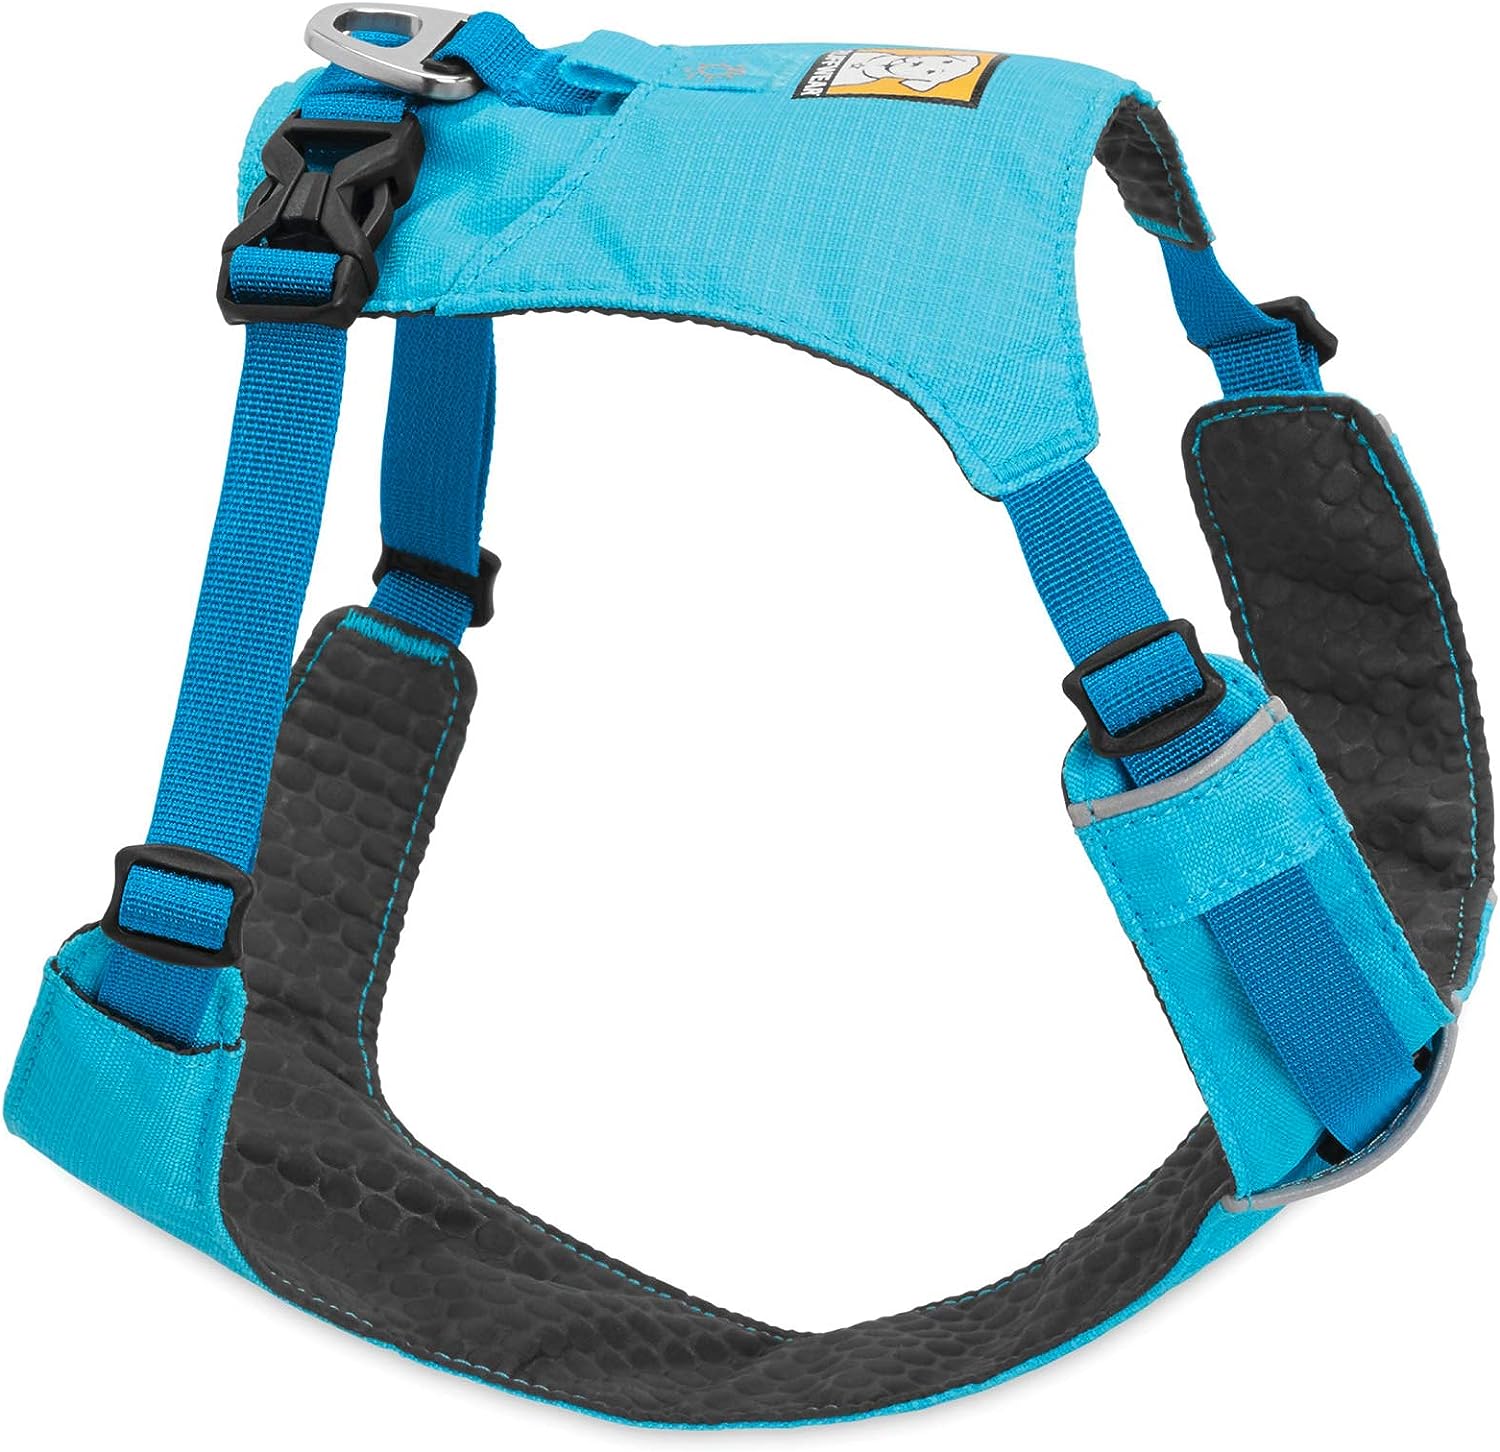 RUFFWEAR Lightweight Dog Harness, Large to Very Large Breeds, Adjustable Fit, Size L/XL (32-42 in/81-106 cm), Blue Atoll, Hi  Light Harness